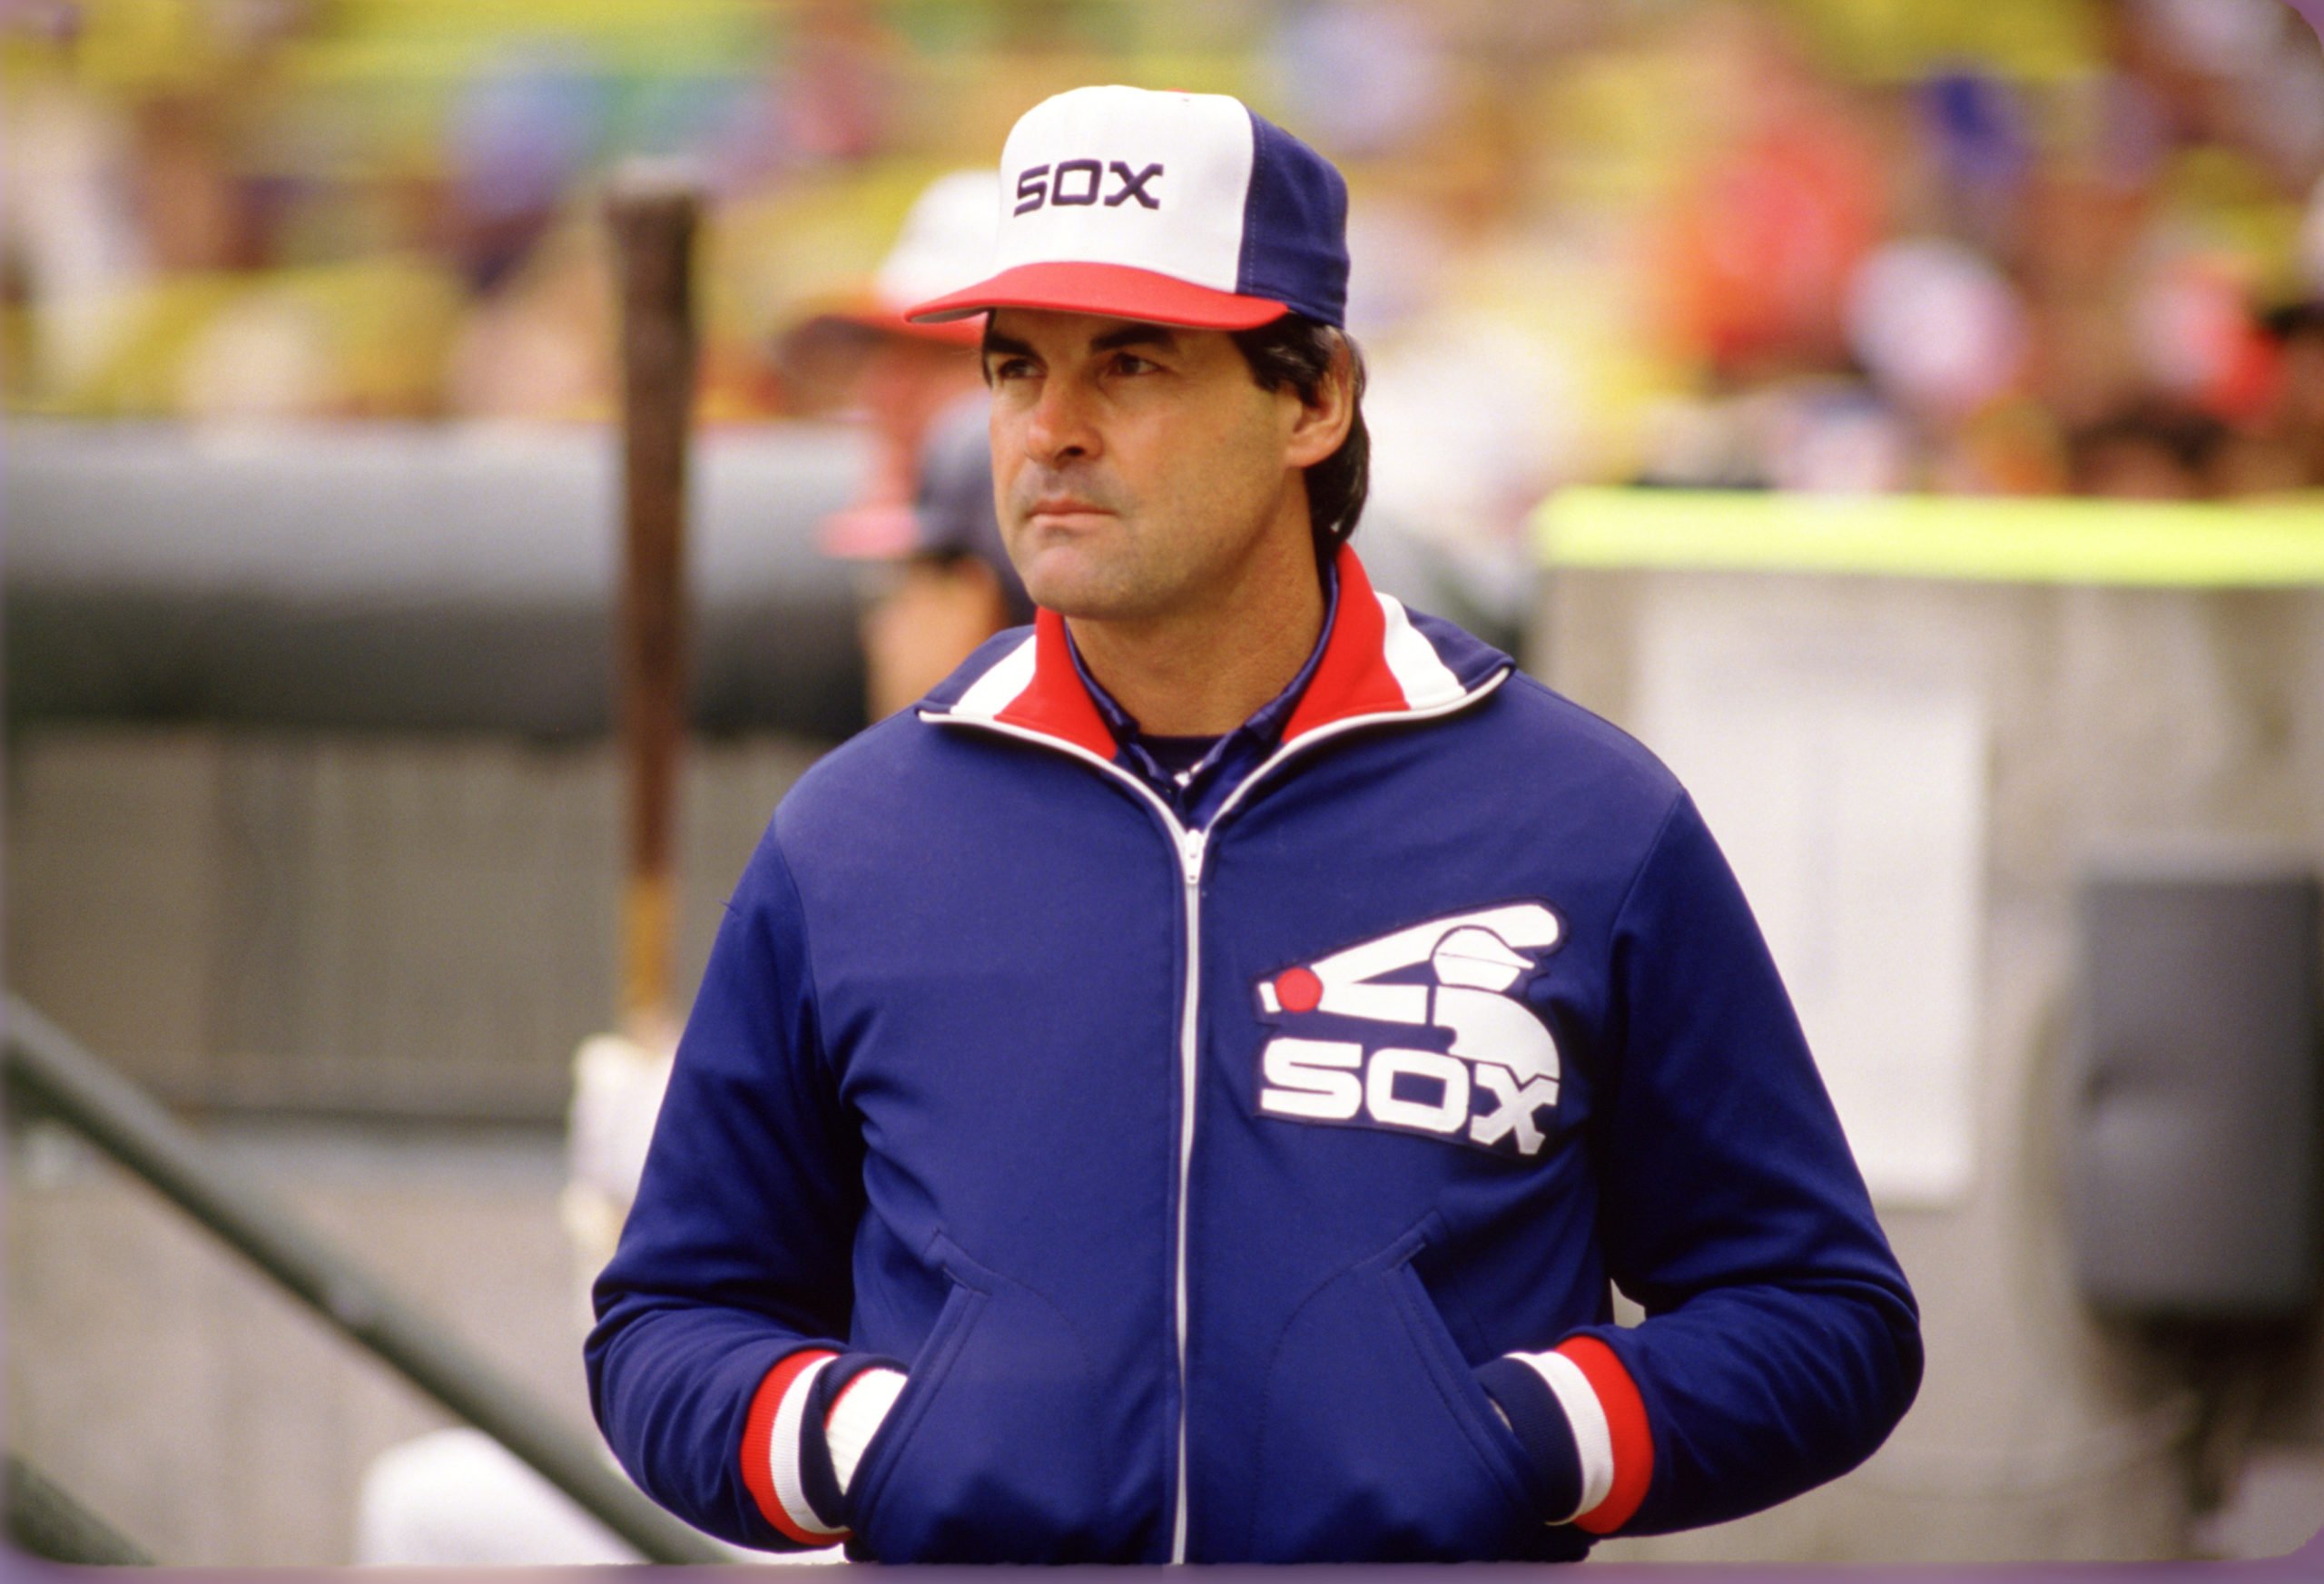 White Sox manager Tony LaRussa stuck in the past - Our Esquina